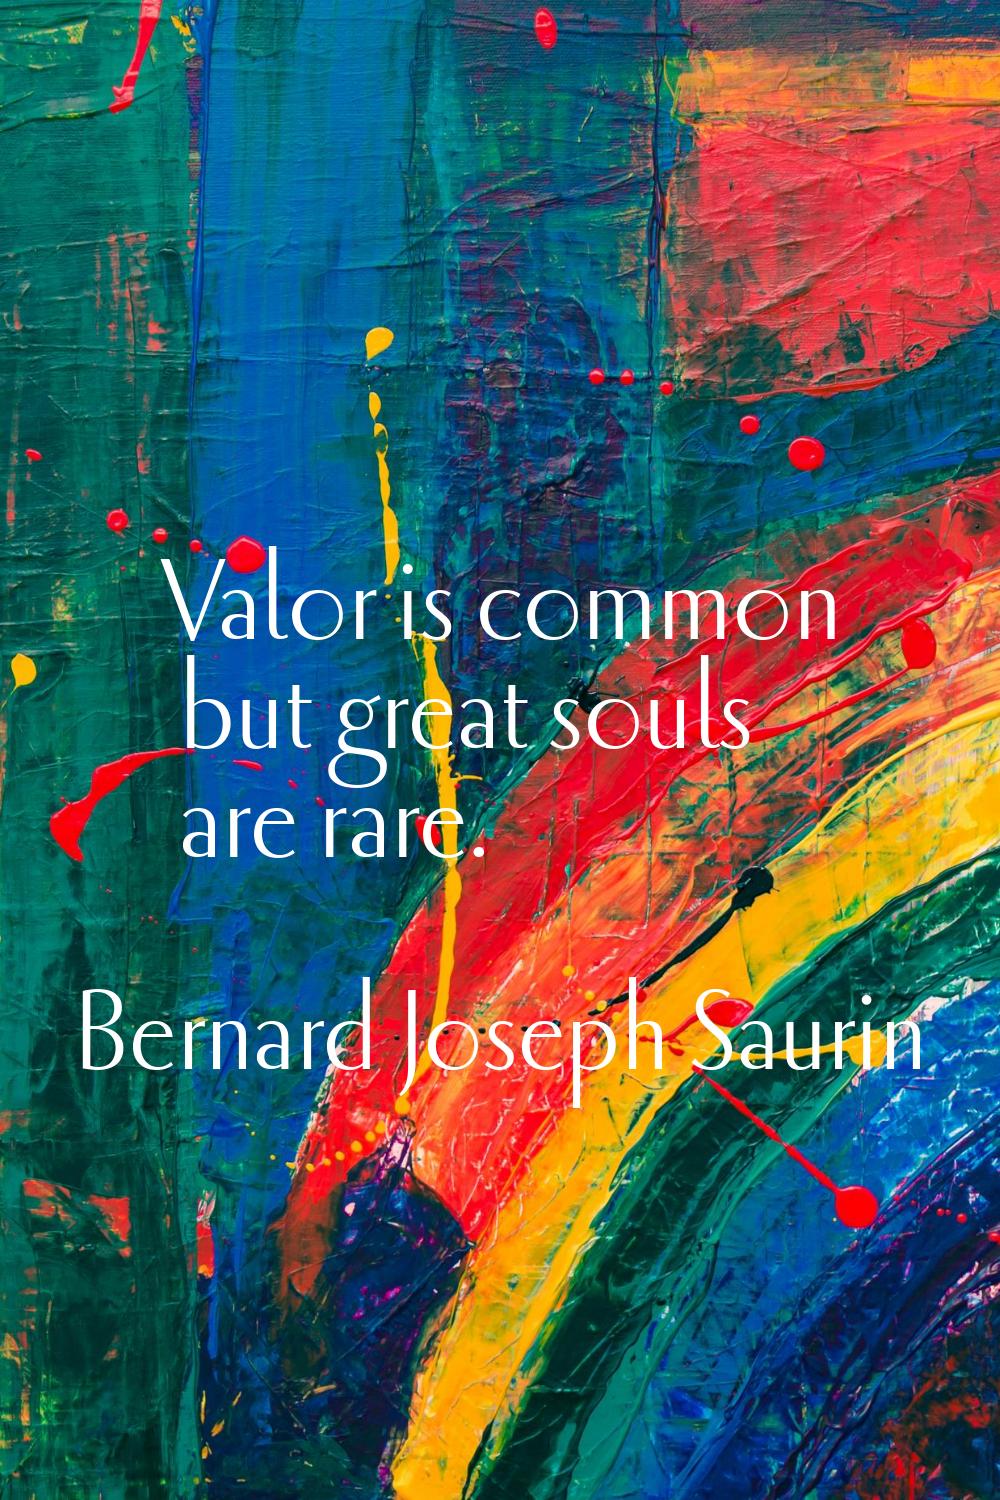 Valor is common but great souls are rare.